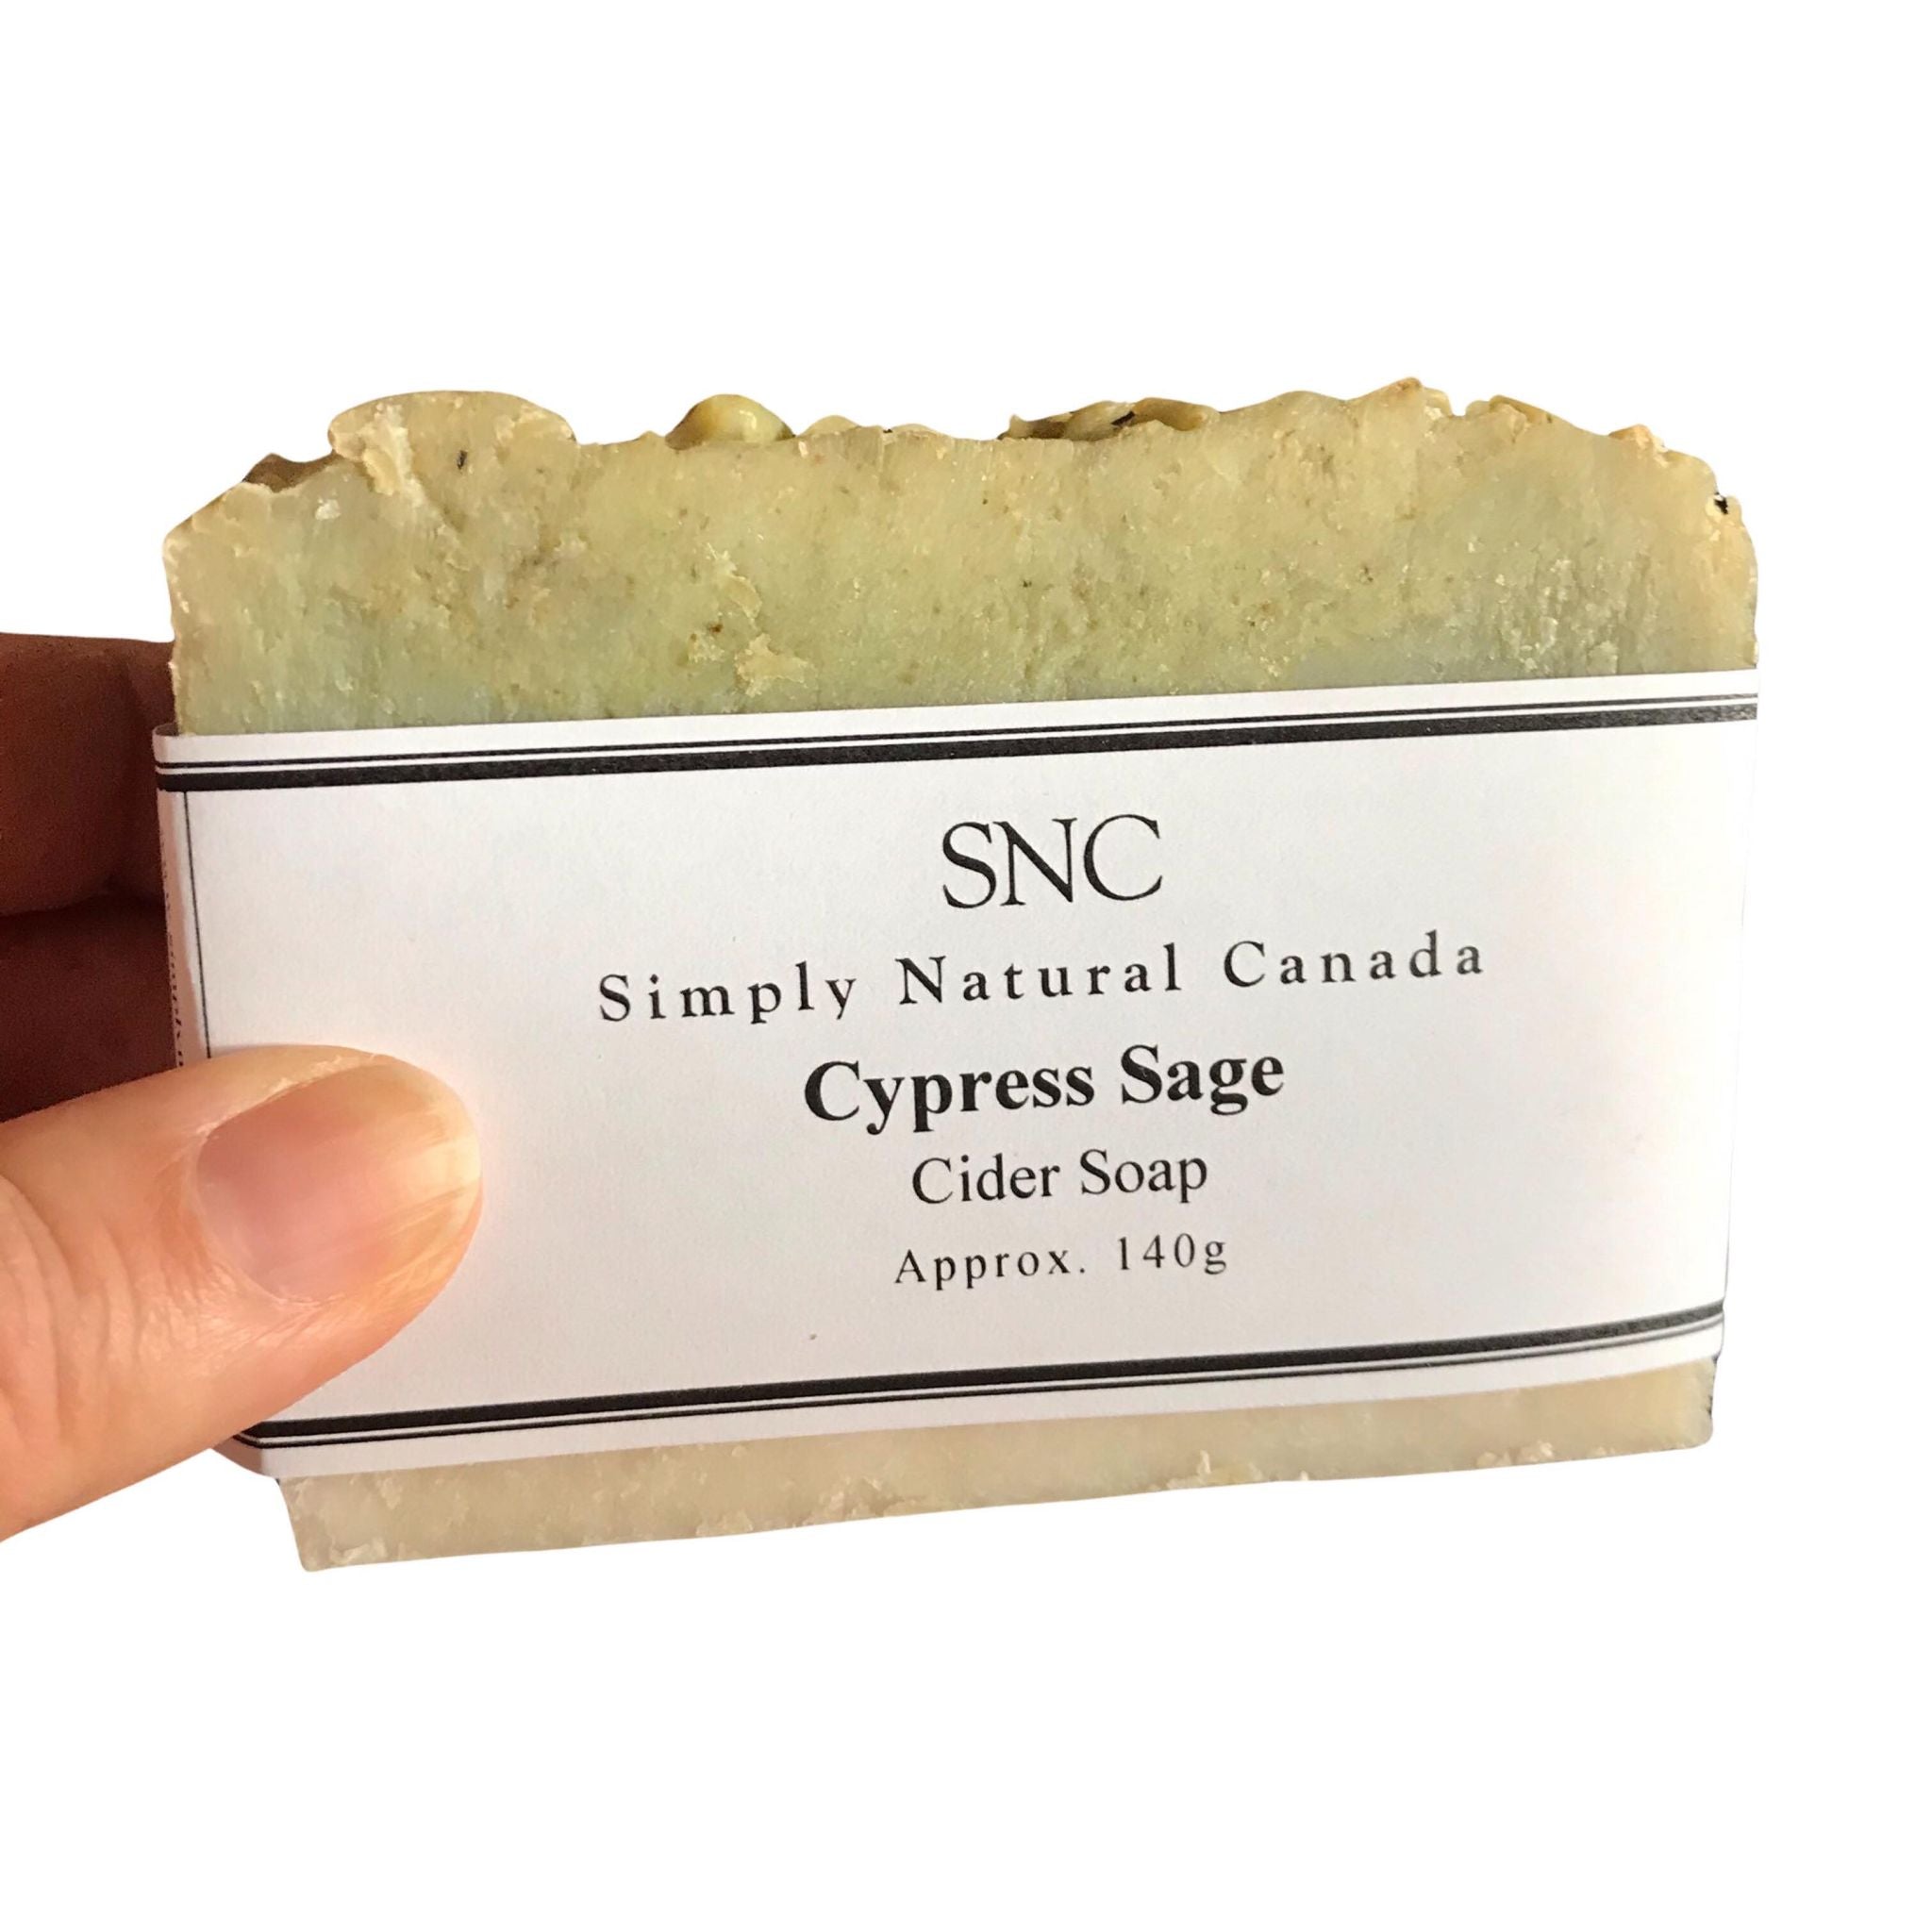 This Simply Natural Canada Cypress Sage cider soap is infused with the crisp essence of cypress, the earthy aroma of sage, and the sweet notes of cider.